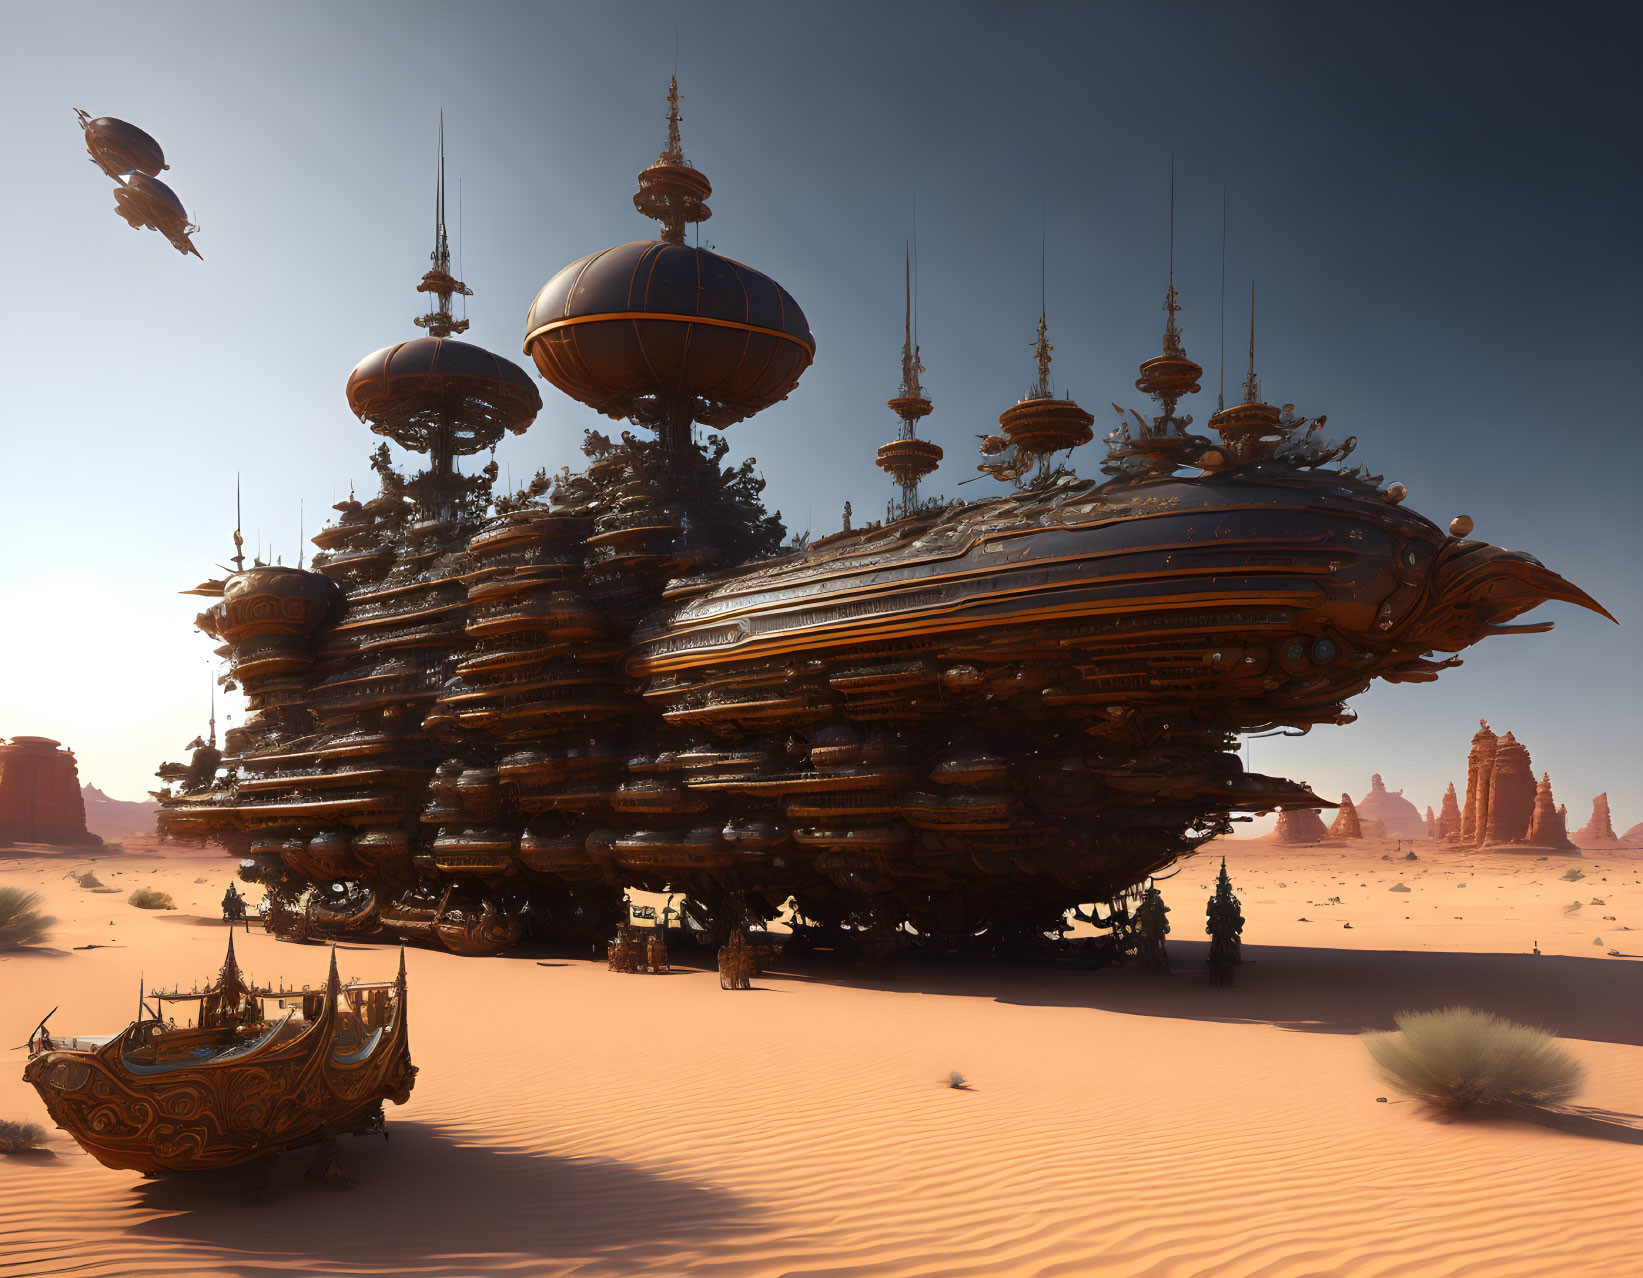 Gigantic steampunk airship over desert with rock formations